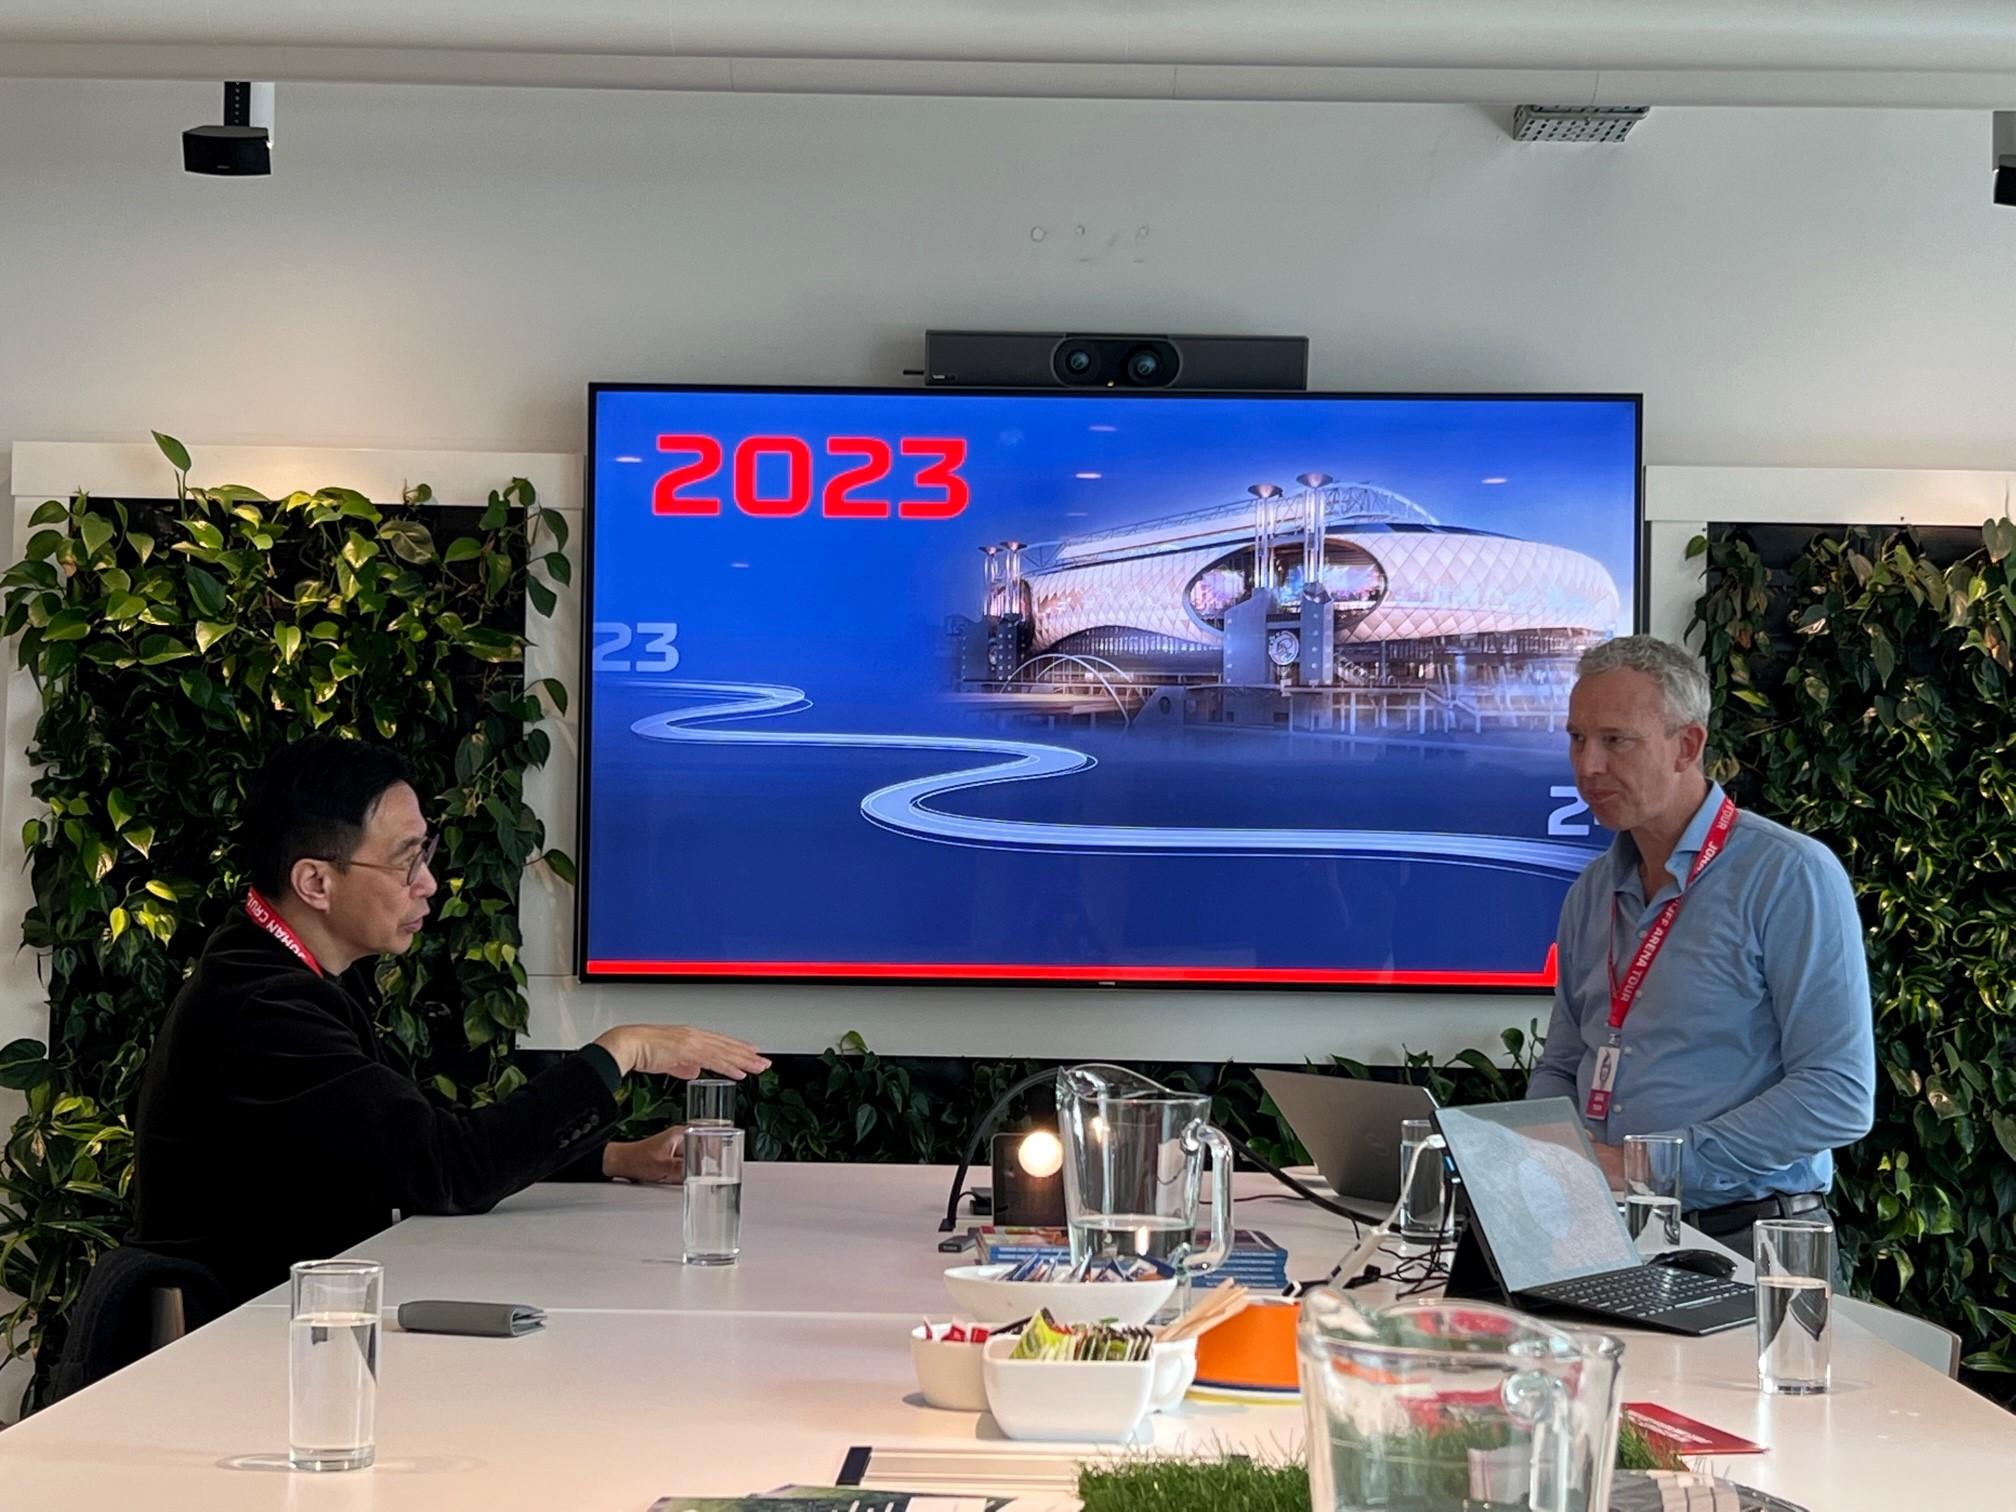 The Secretary for Culture, Sports and Tourism, Mr Kevin Yeung (left), today (March 30, Amsterdam time) visited Johan Cruijff Arena in the Netherlands and attended a briefing.
